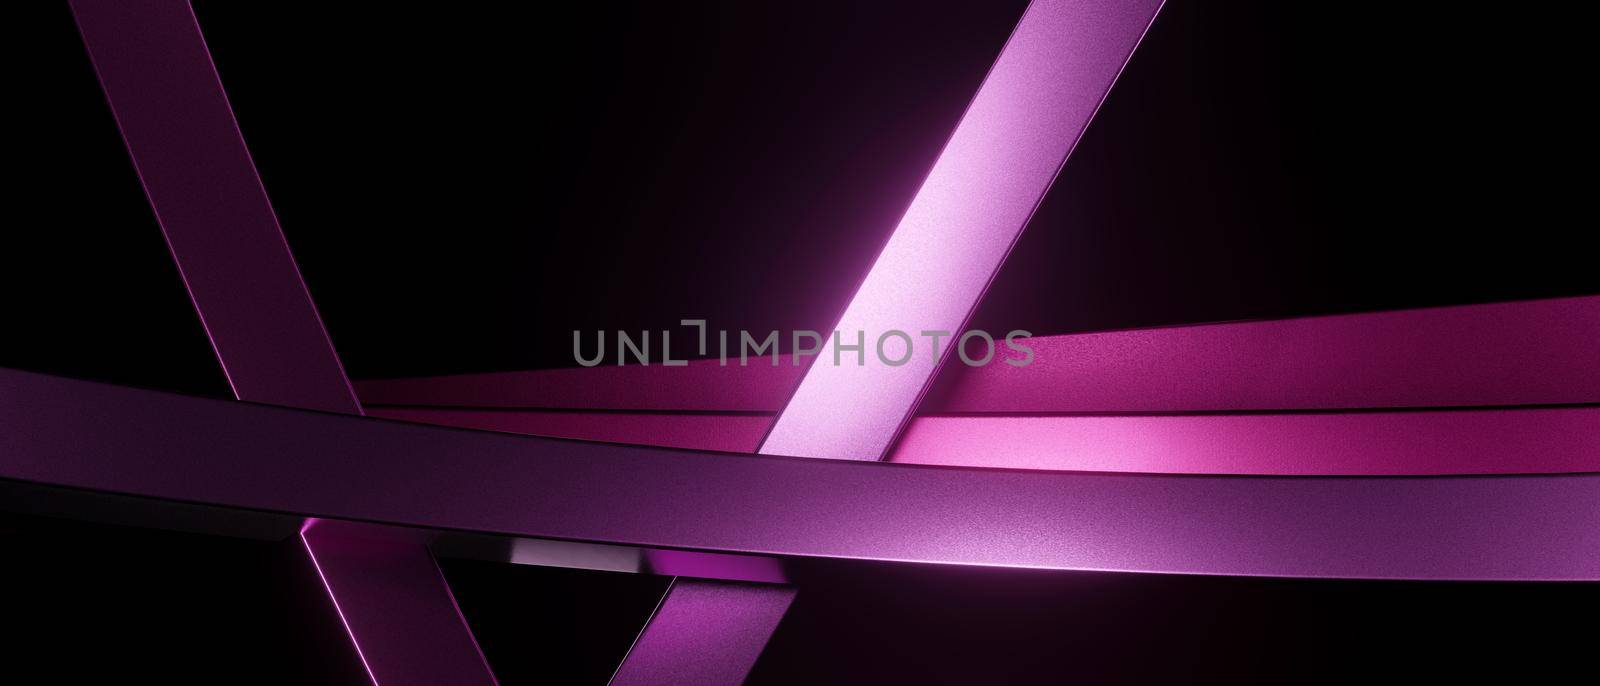 Abstract Modern Shiny Metallic Purple Pink Abstract Background 3D Illustration